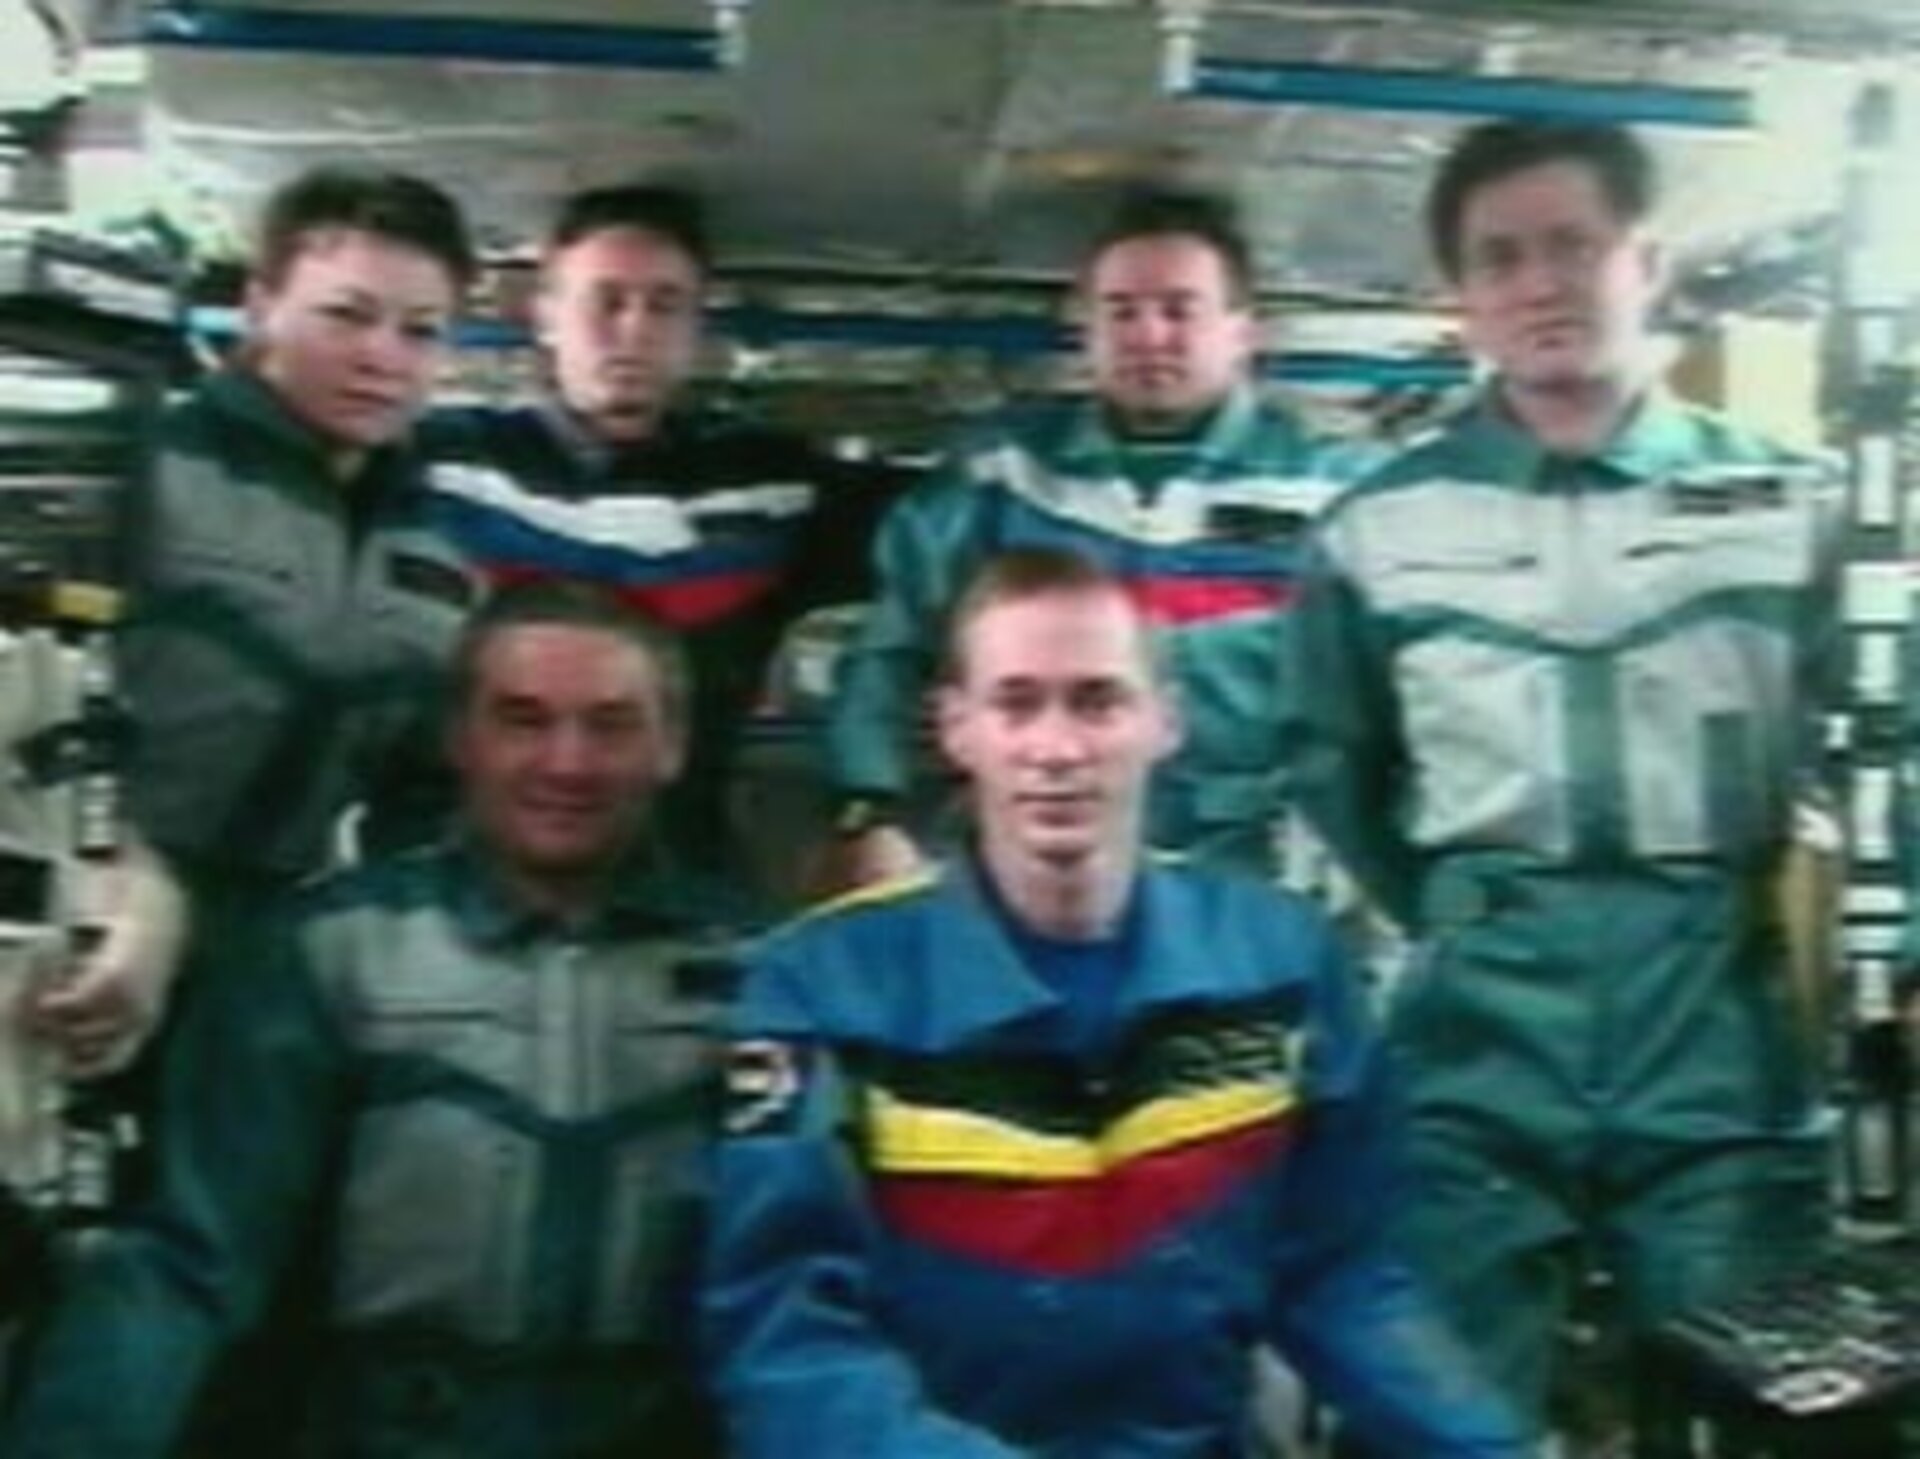 Odissea crew shown here together with Expedition Five crew during a joint inflight call